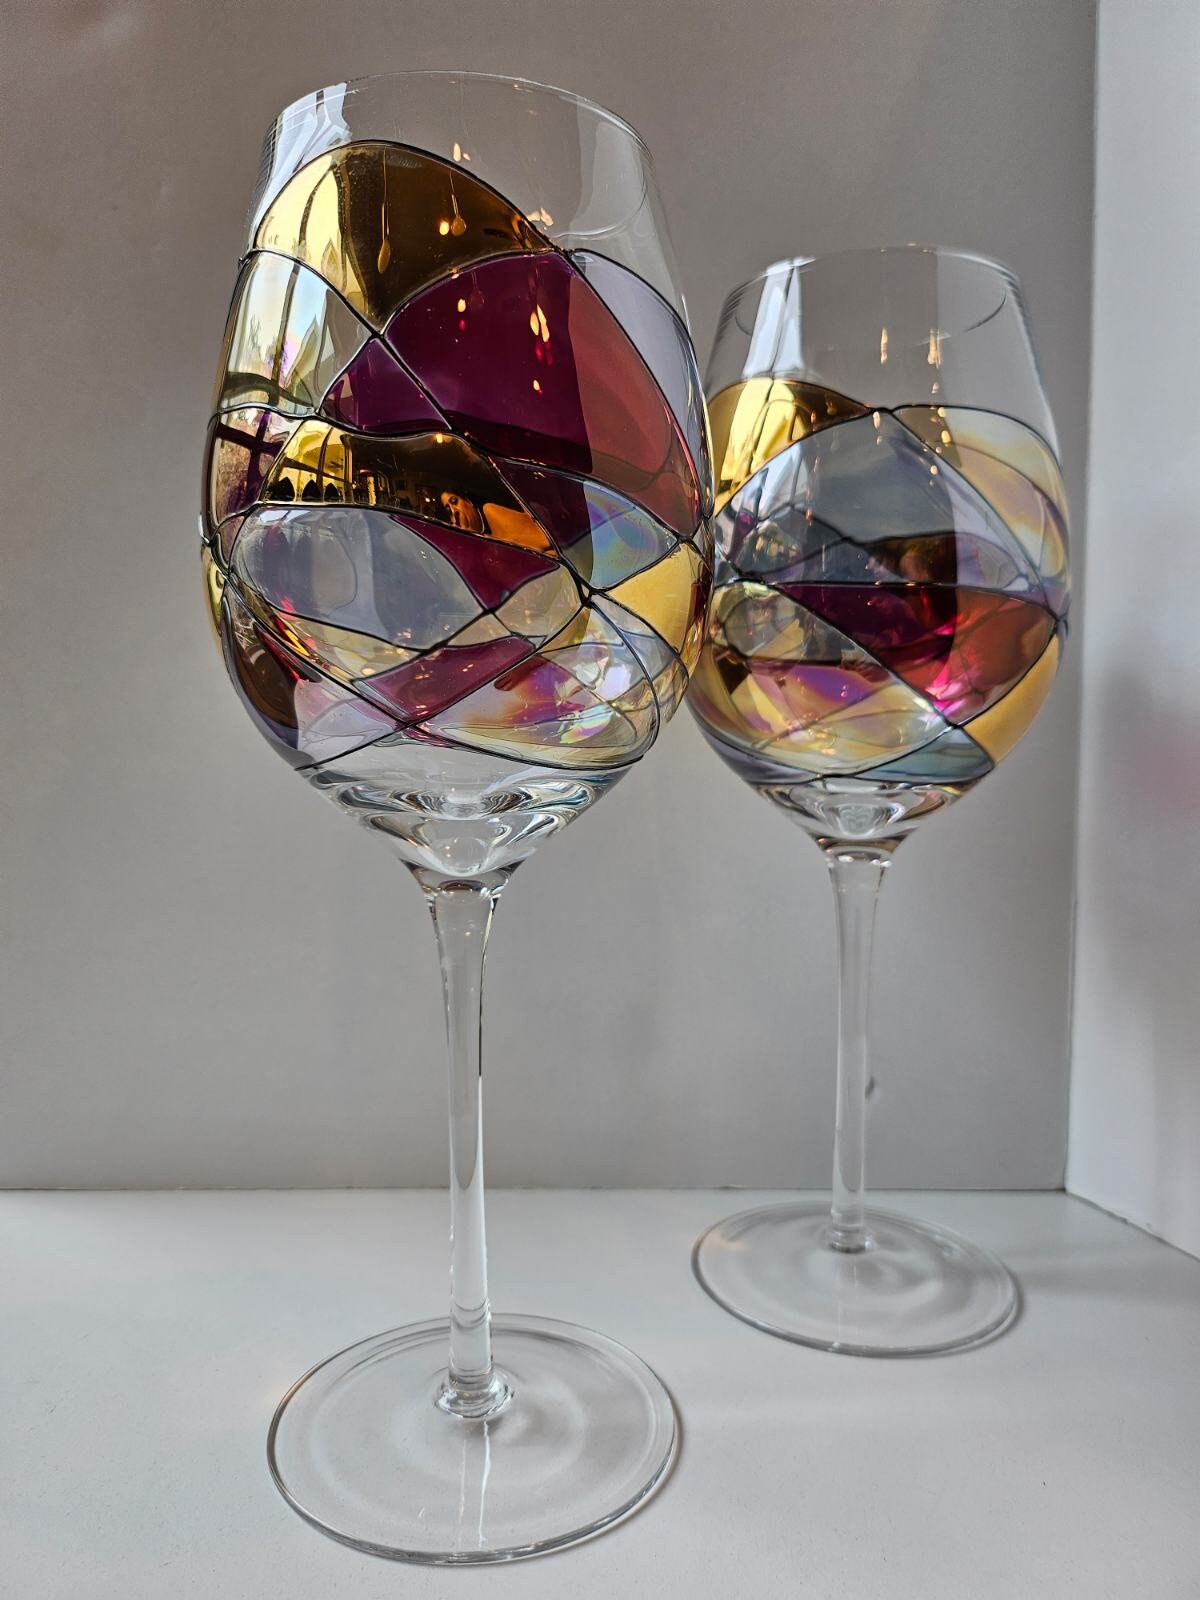 Large Wine Glasses Set of 2 Stained Glass Pattern Painted Mosaic